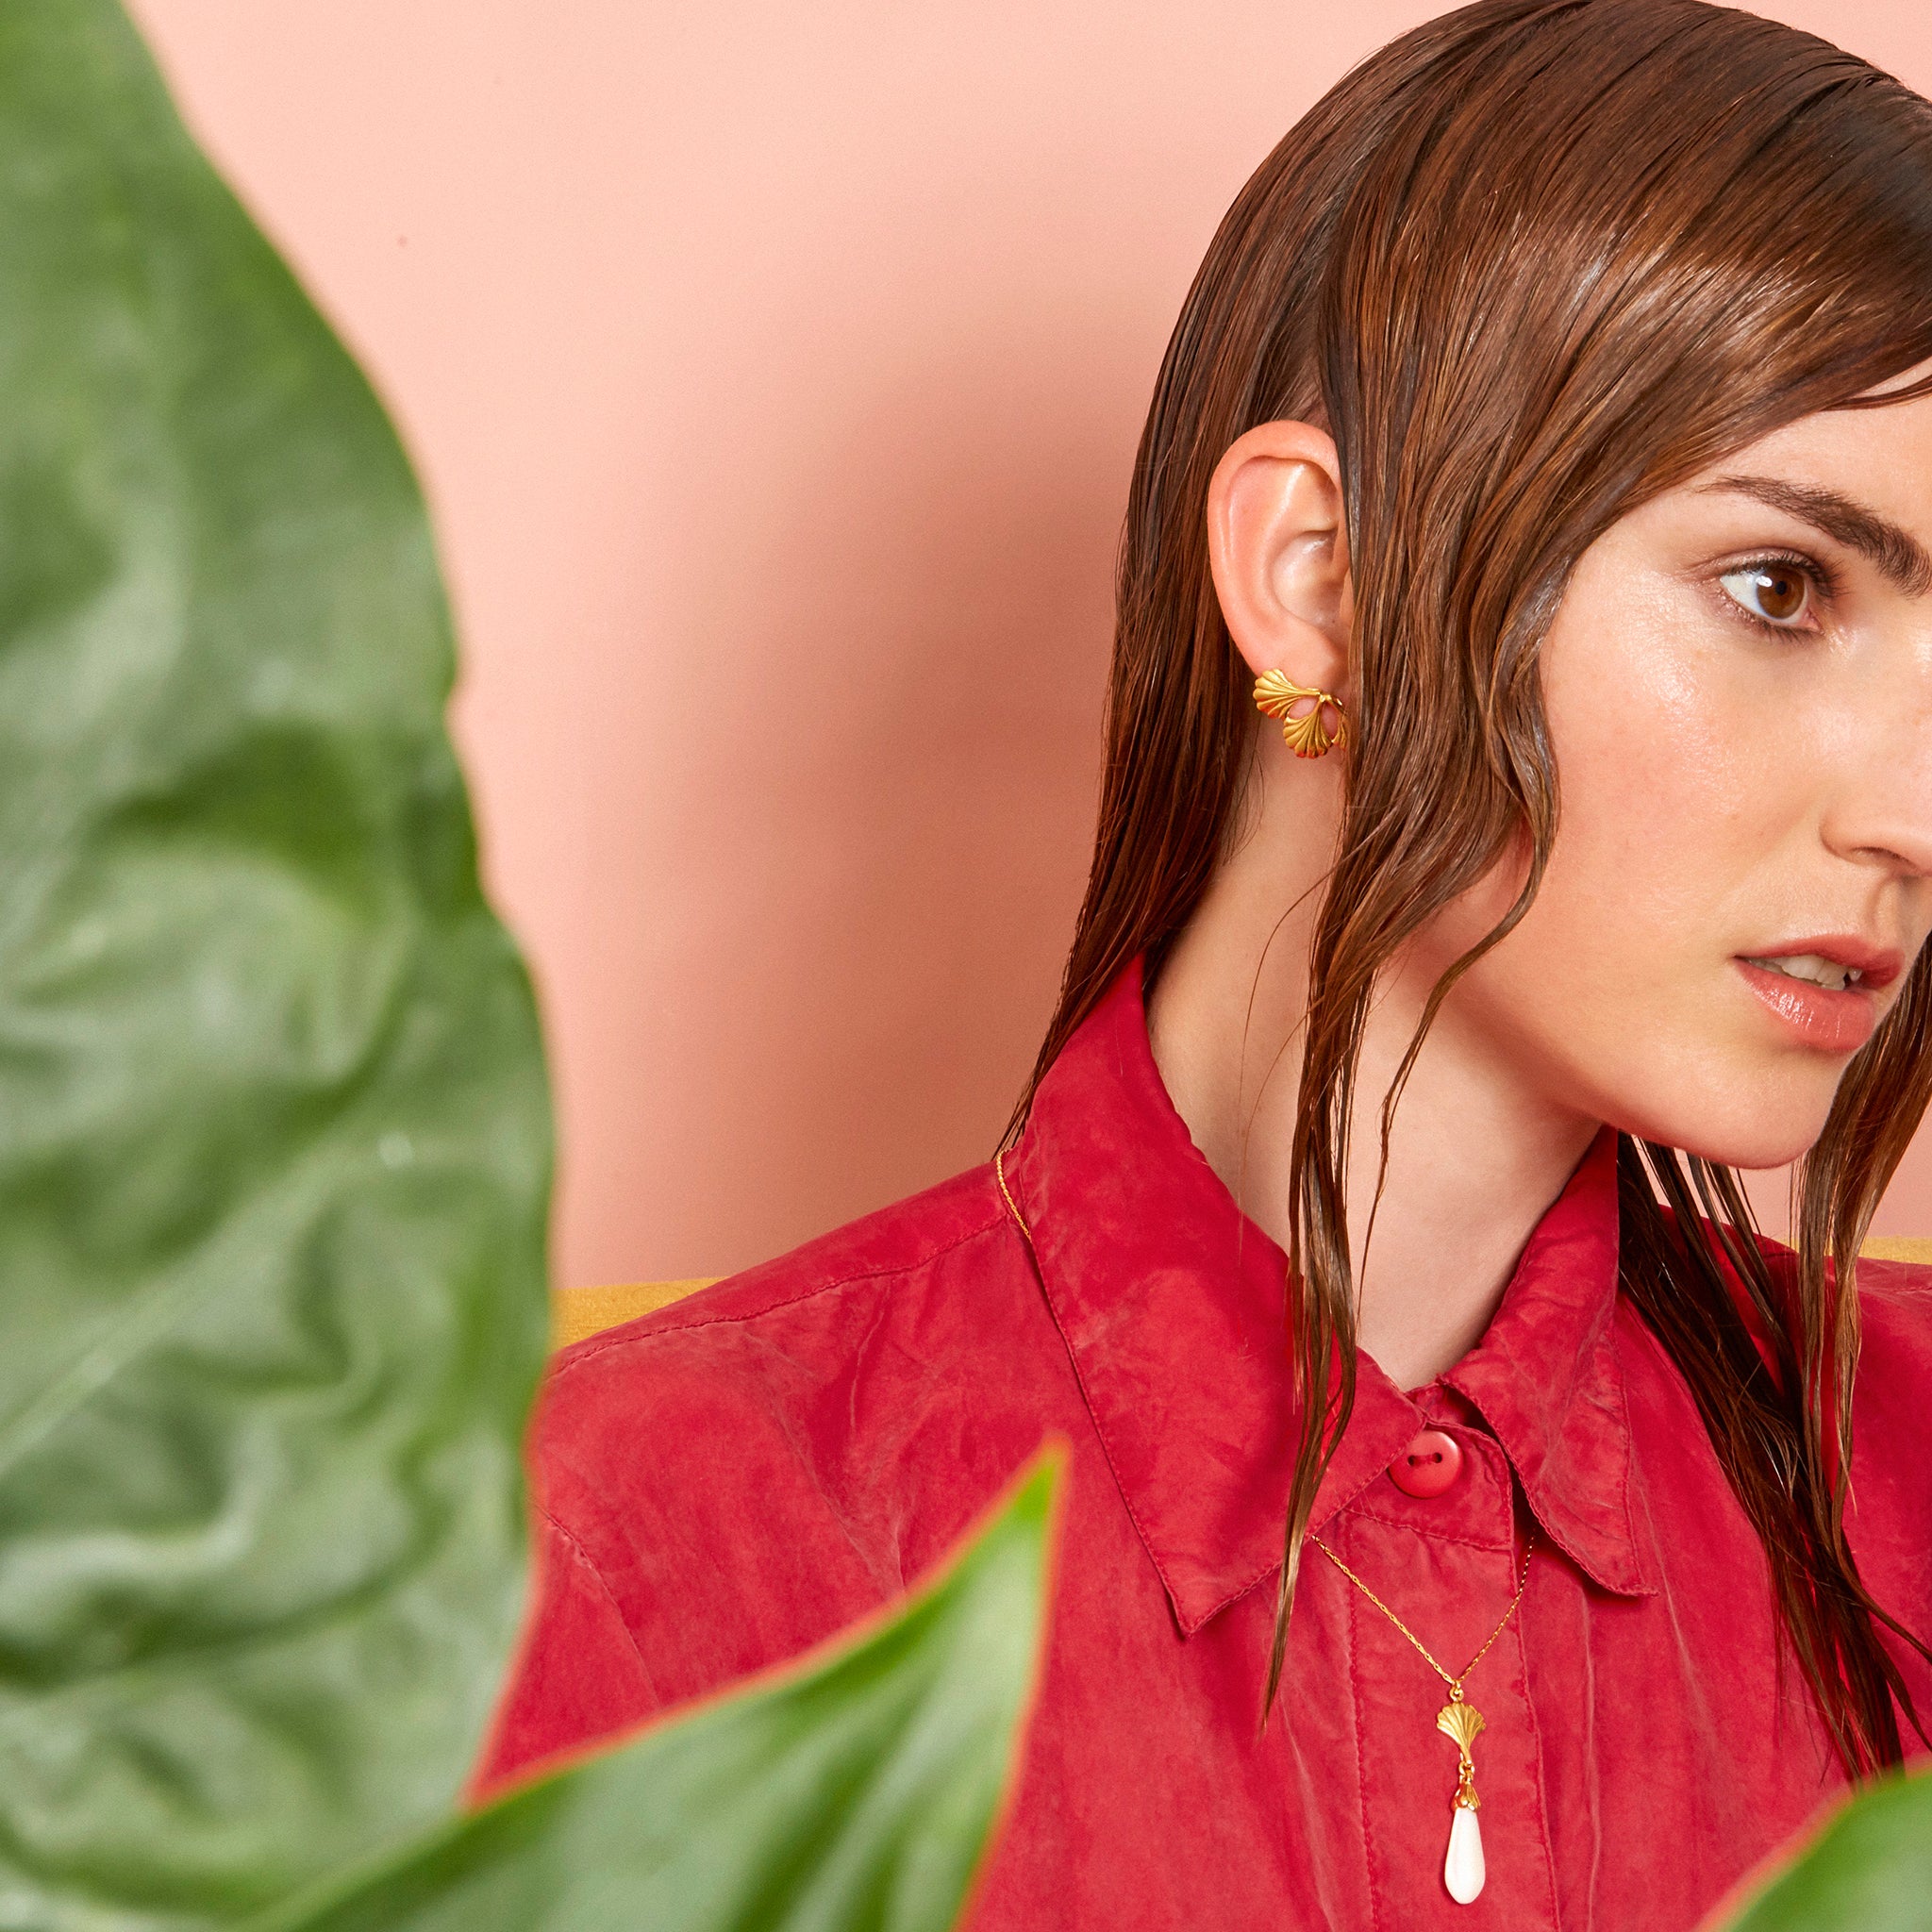 Model in red blouse wearing yellow gold necklace